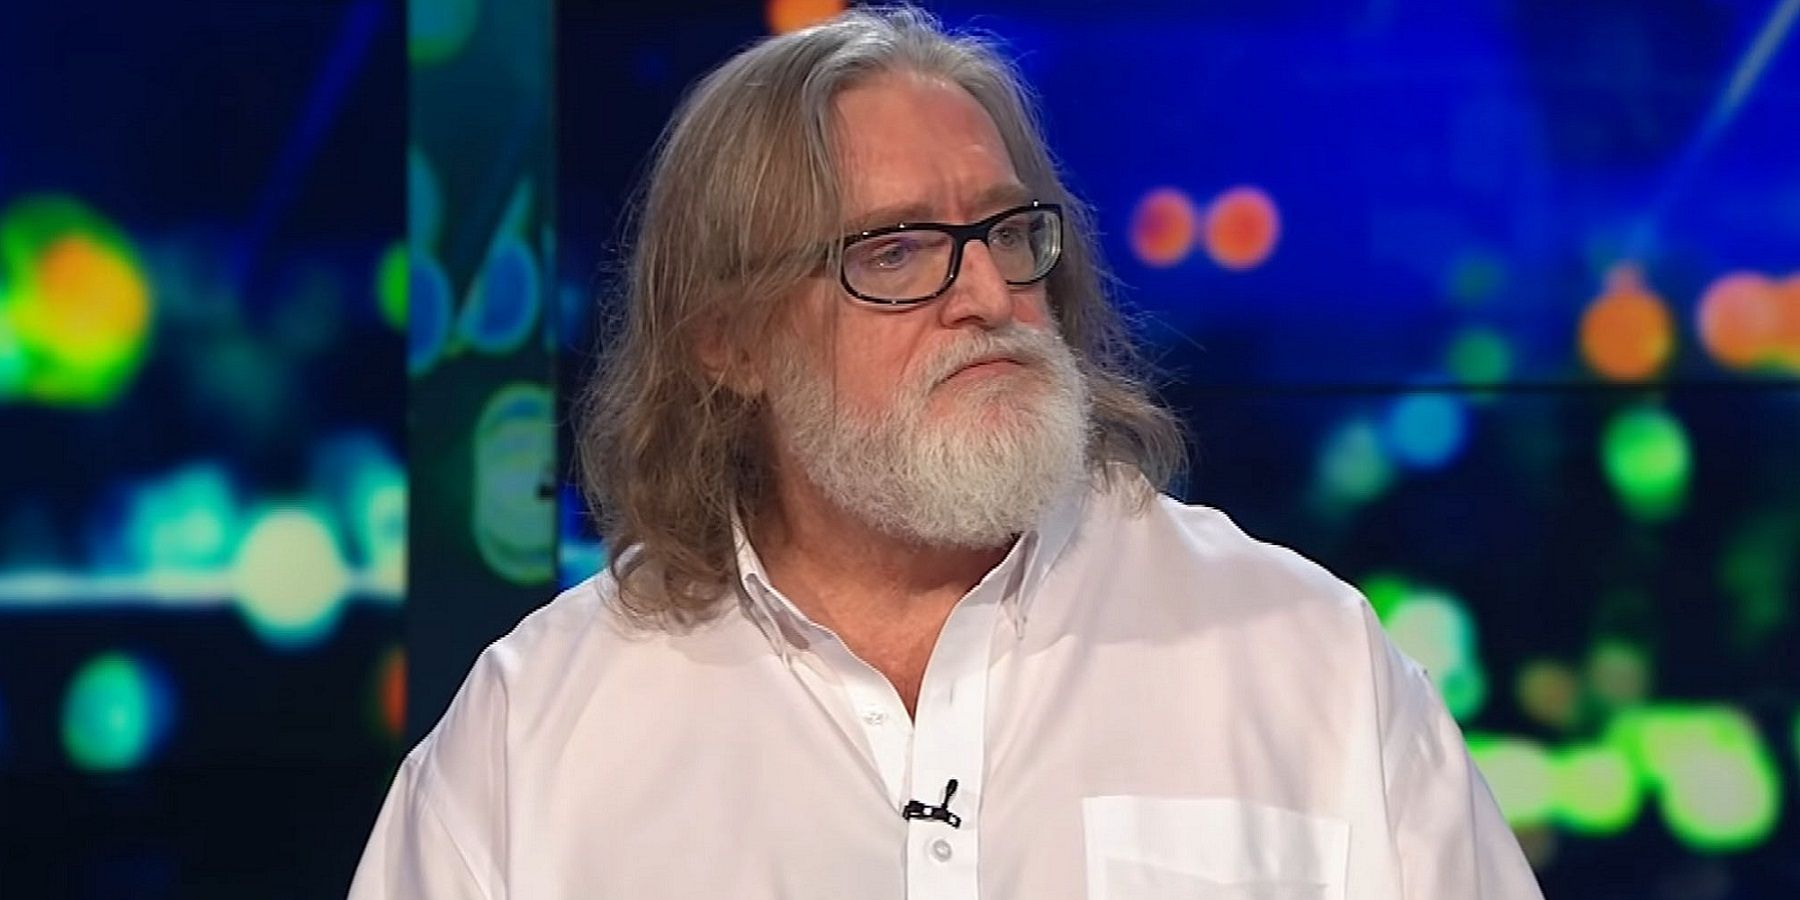 A photo of Valve CEO Gabe Newell wearing a white shirt.